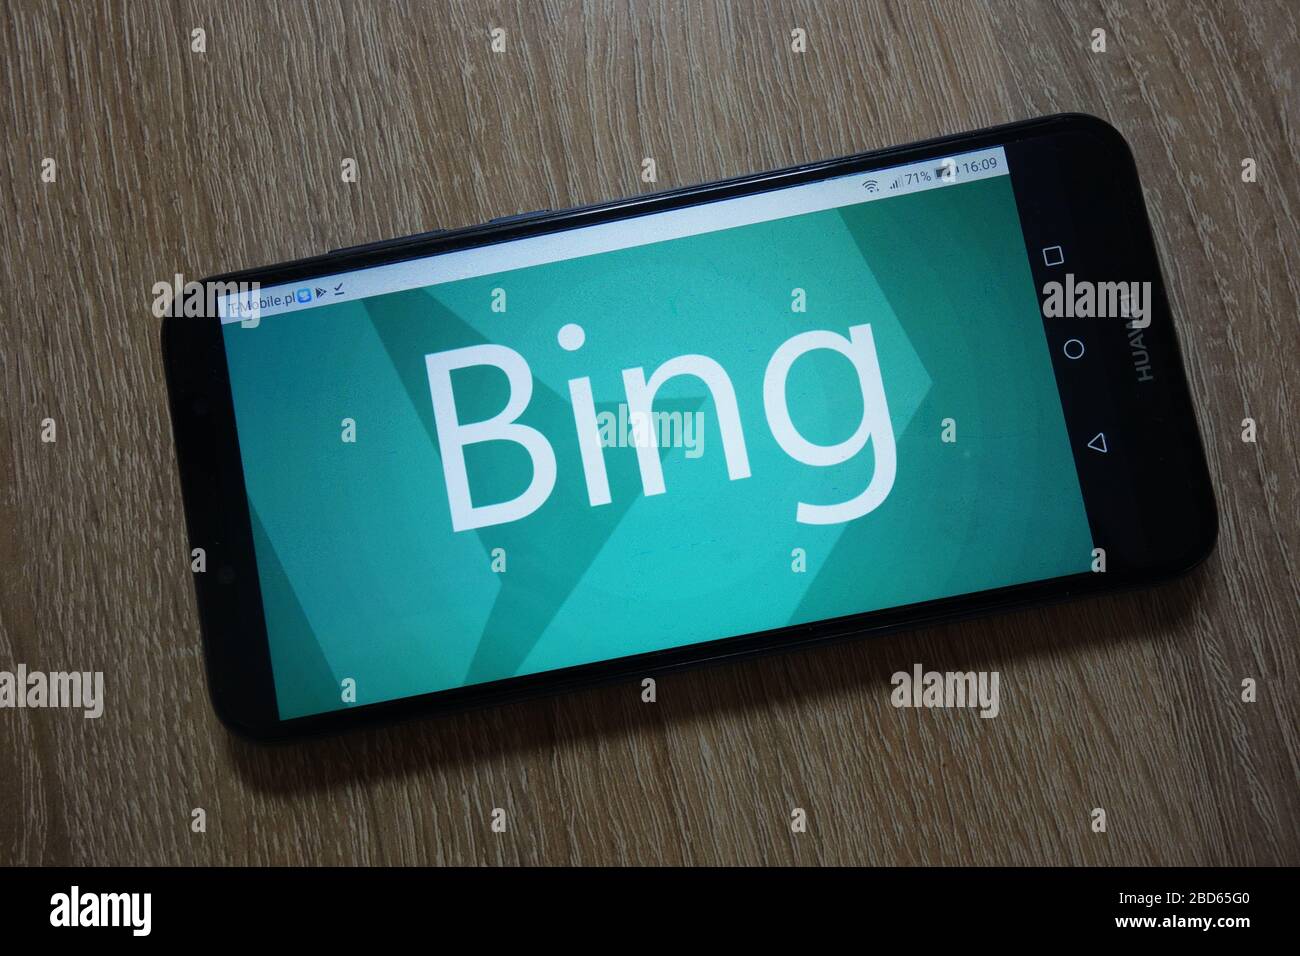 Bing logo displayed on smartphone. Bing is a web search engine owned and operated by Microsoft Stock Photo